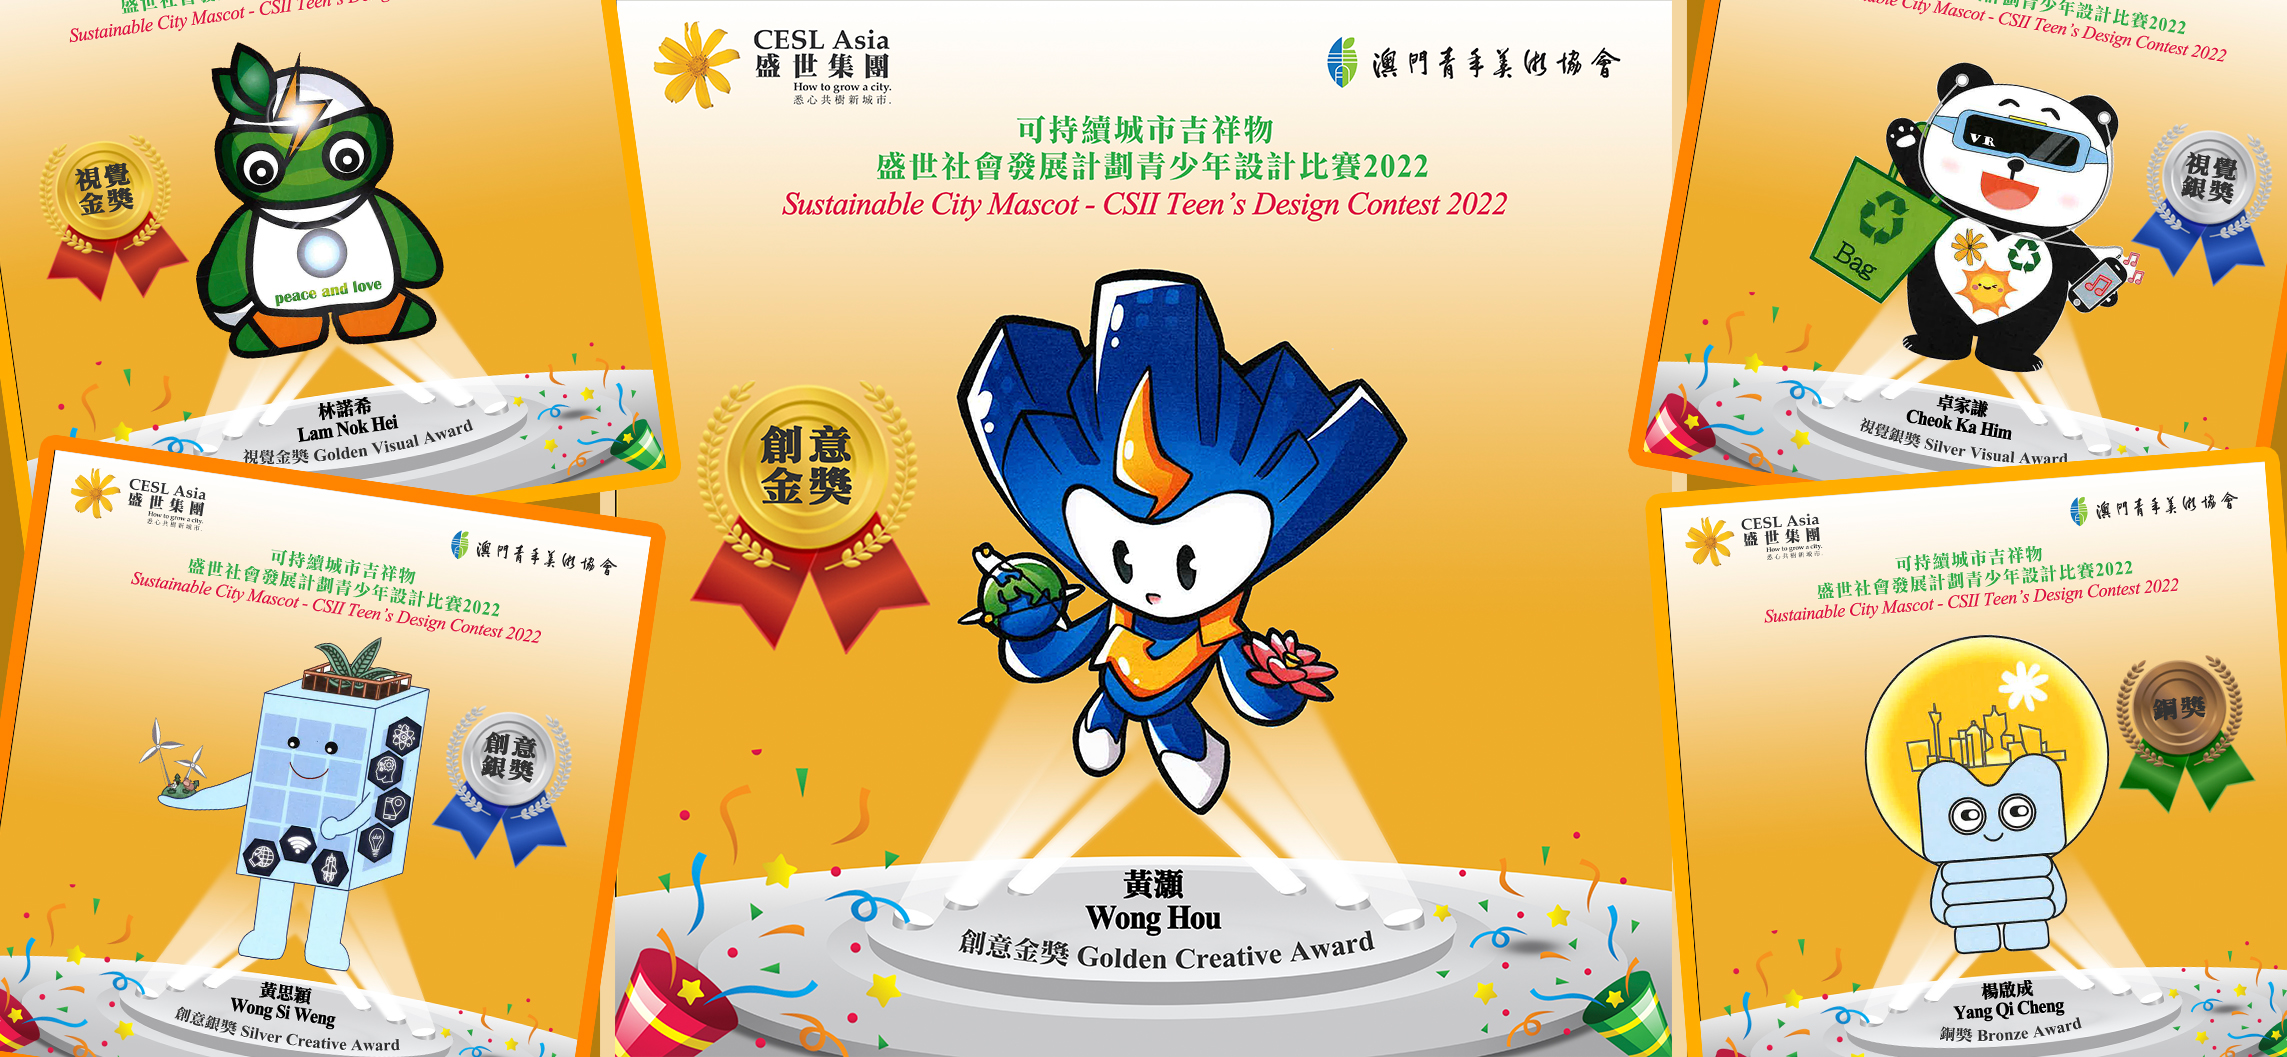 CESL Asia “Teen’s Design 2022 – Sustainable City Mascot” aims to create a shared understanding of the concepts of sustainable cities among Macau’s younger generation